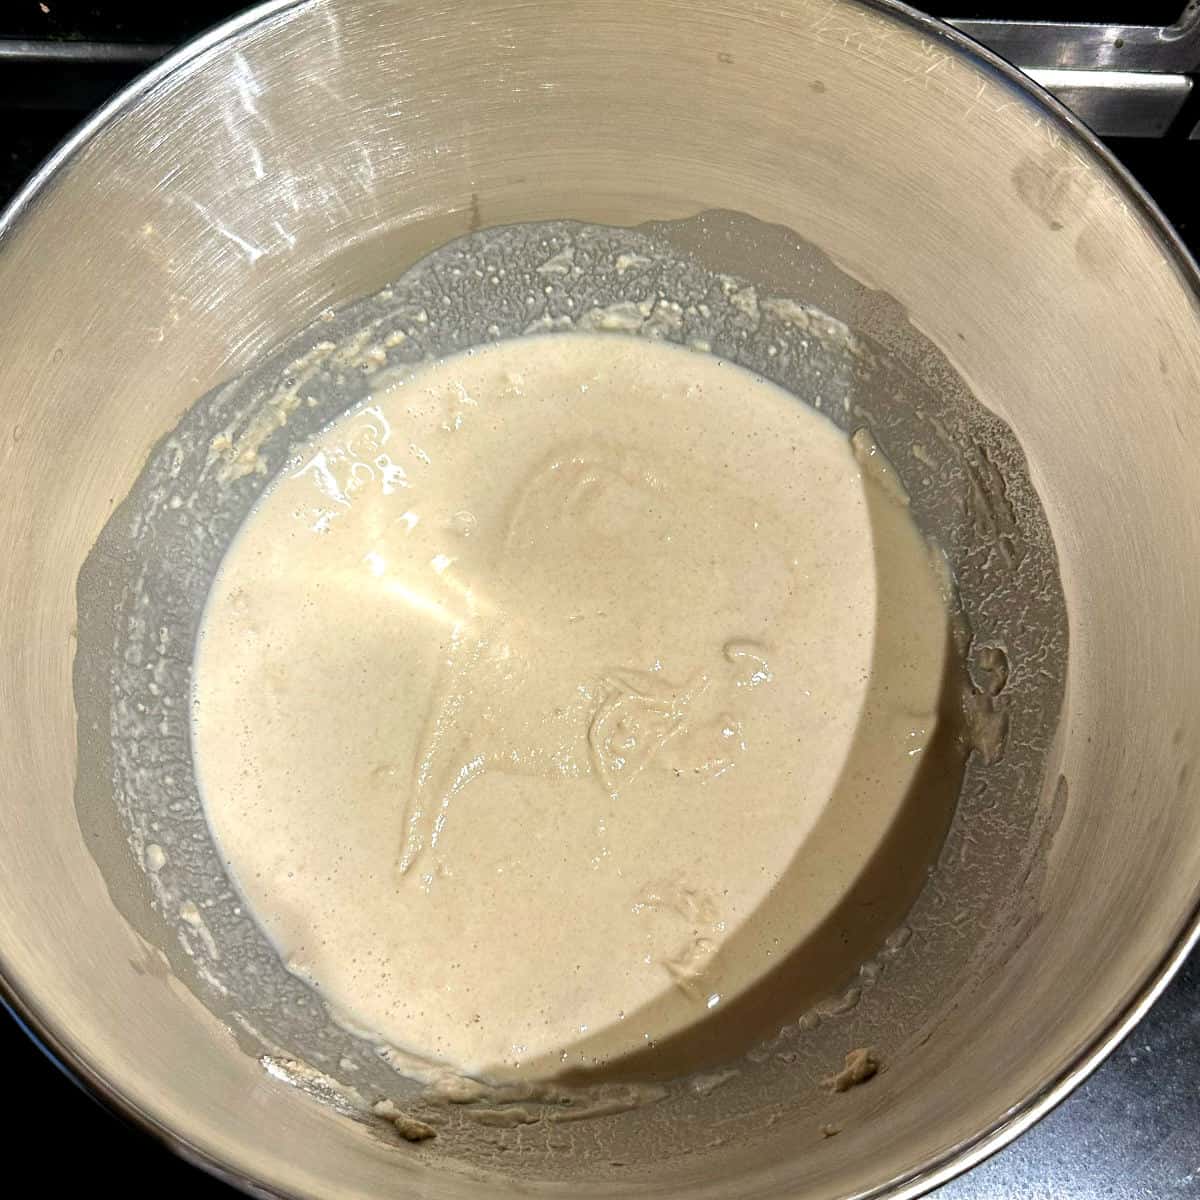 Sourdough starter, water and flour mixed in stand mixer bowl.